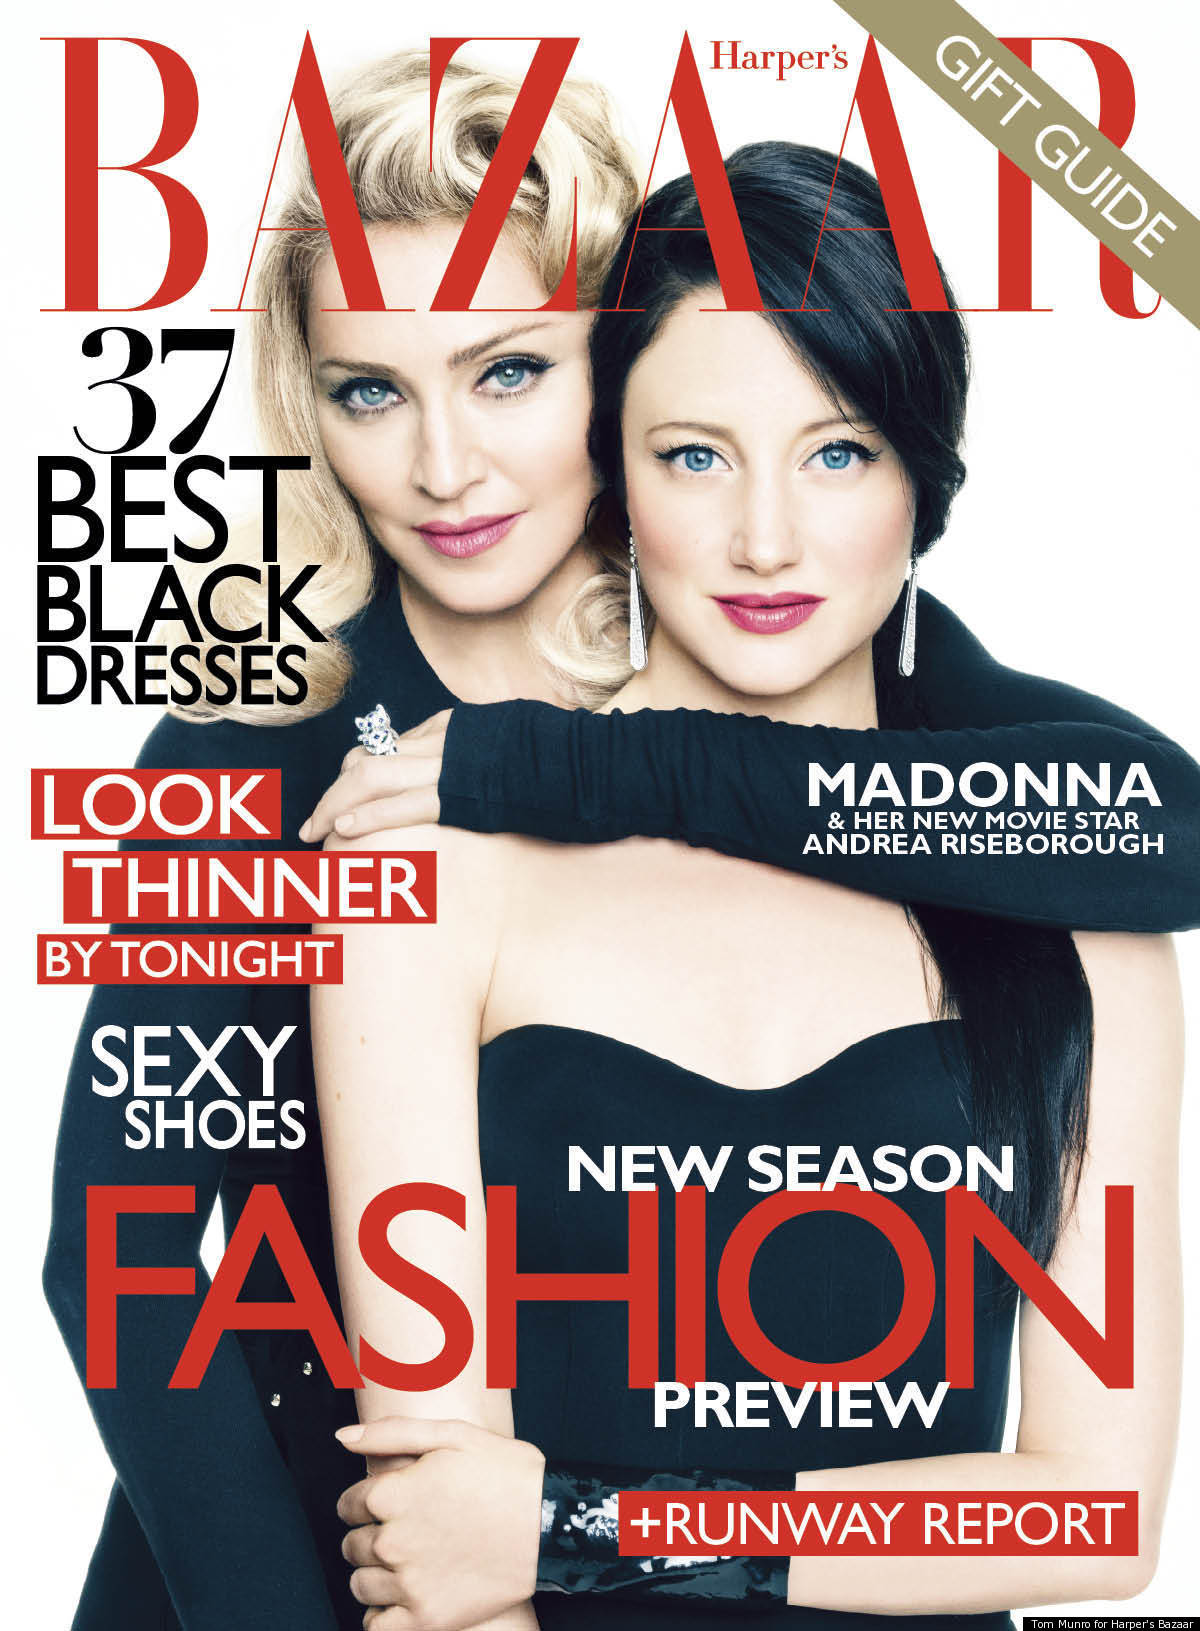 Madonna Covers Harper S Bazaar Talks New Movie Controversy And Sex